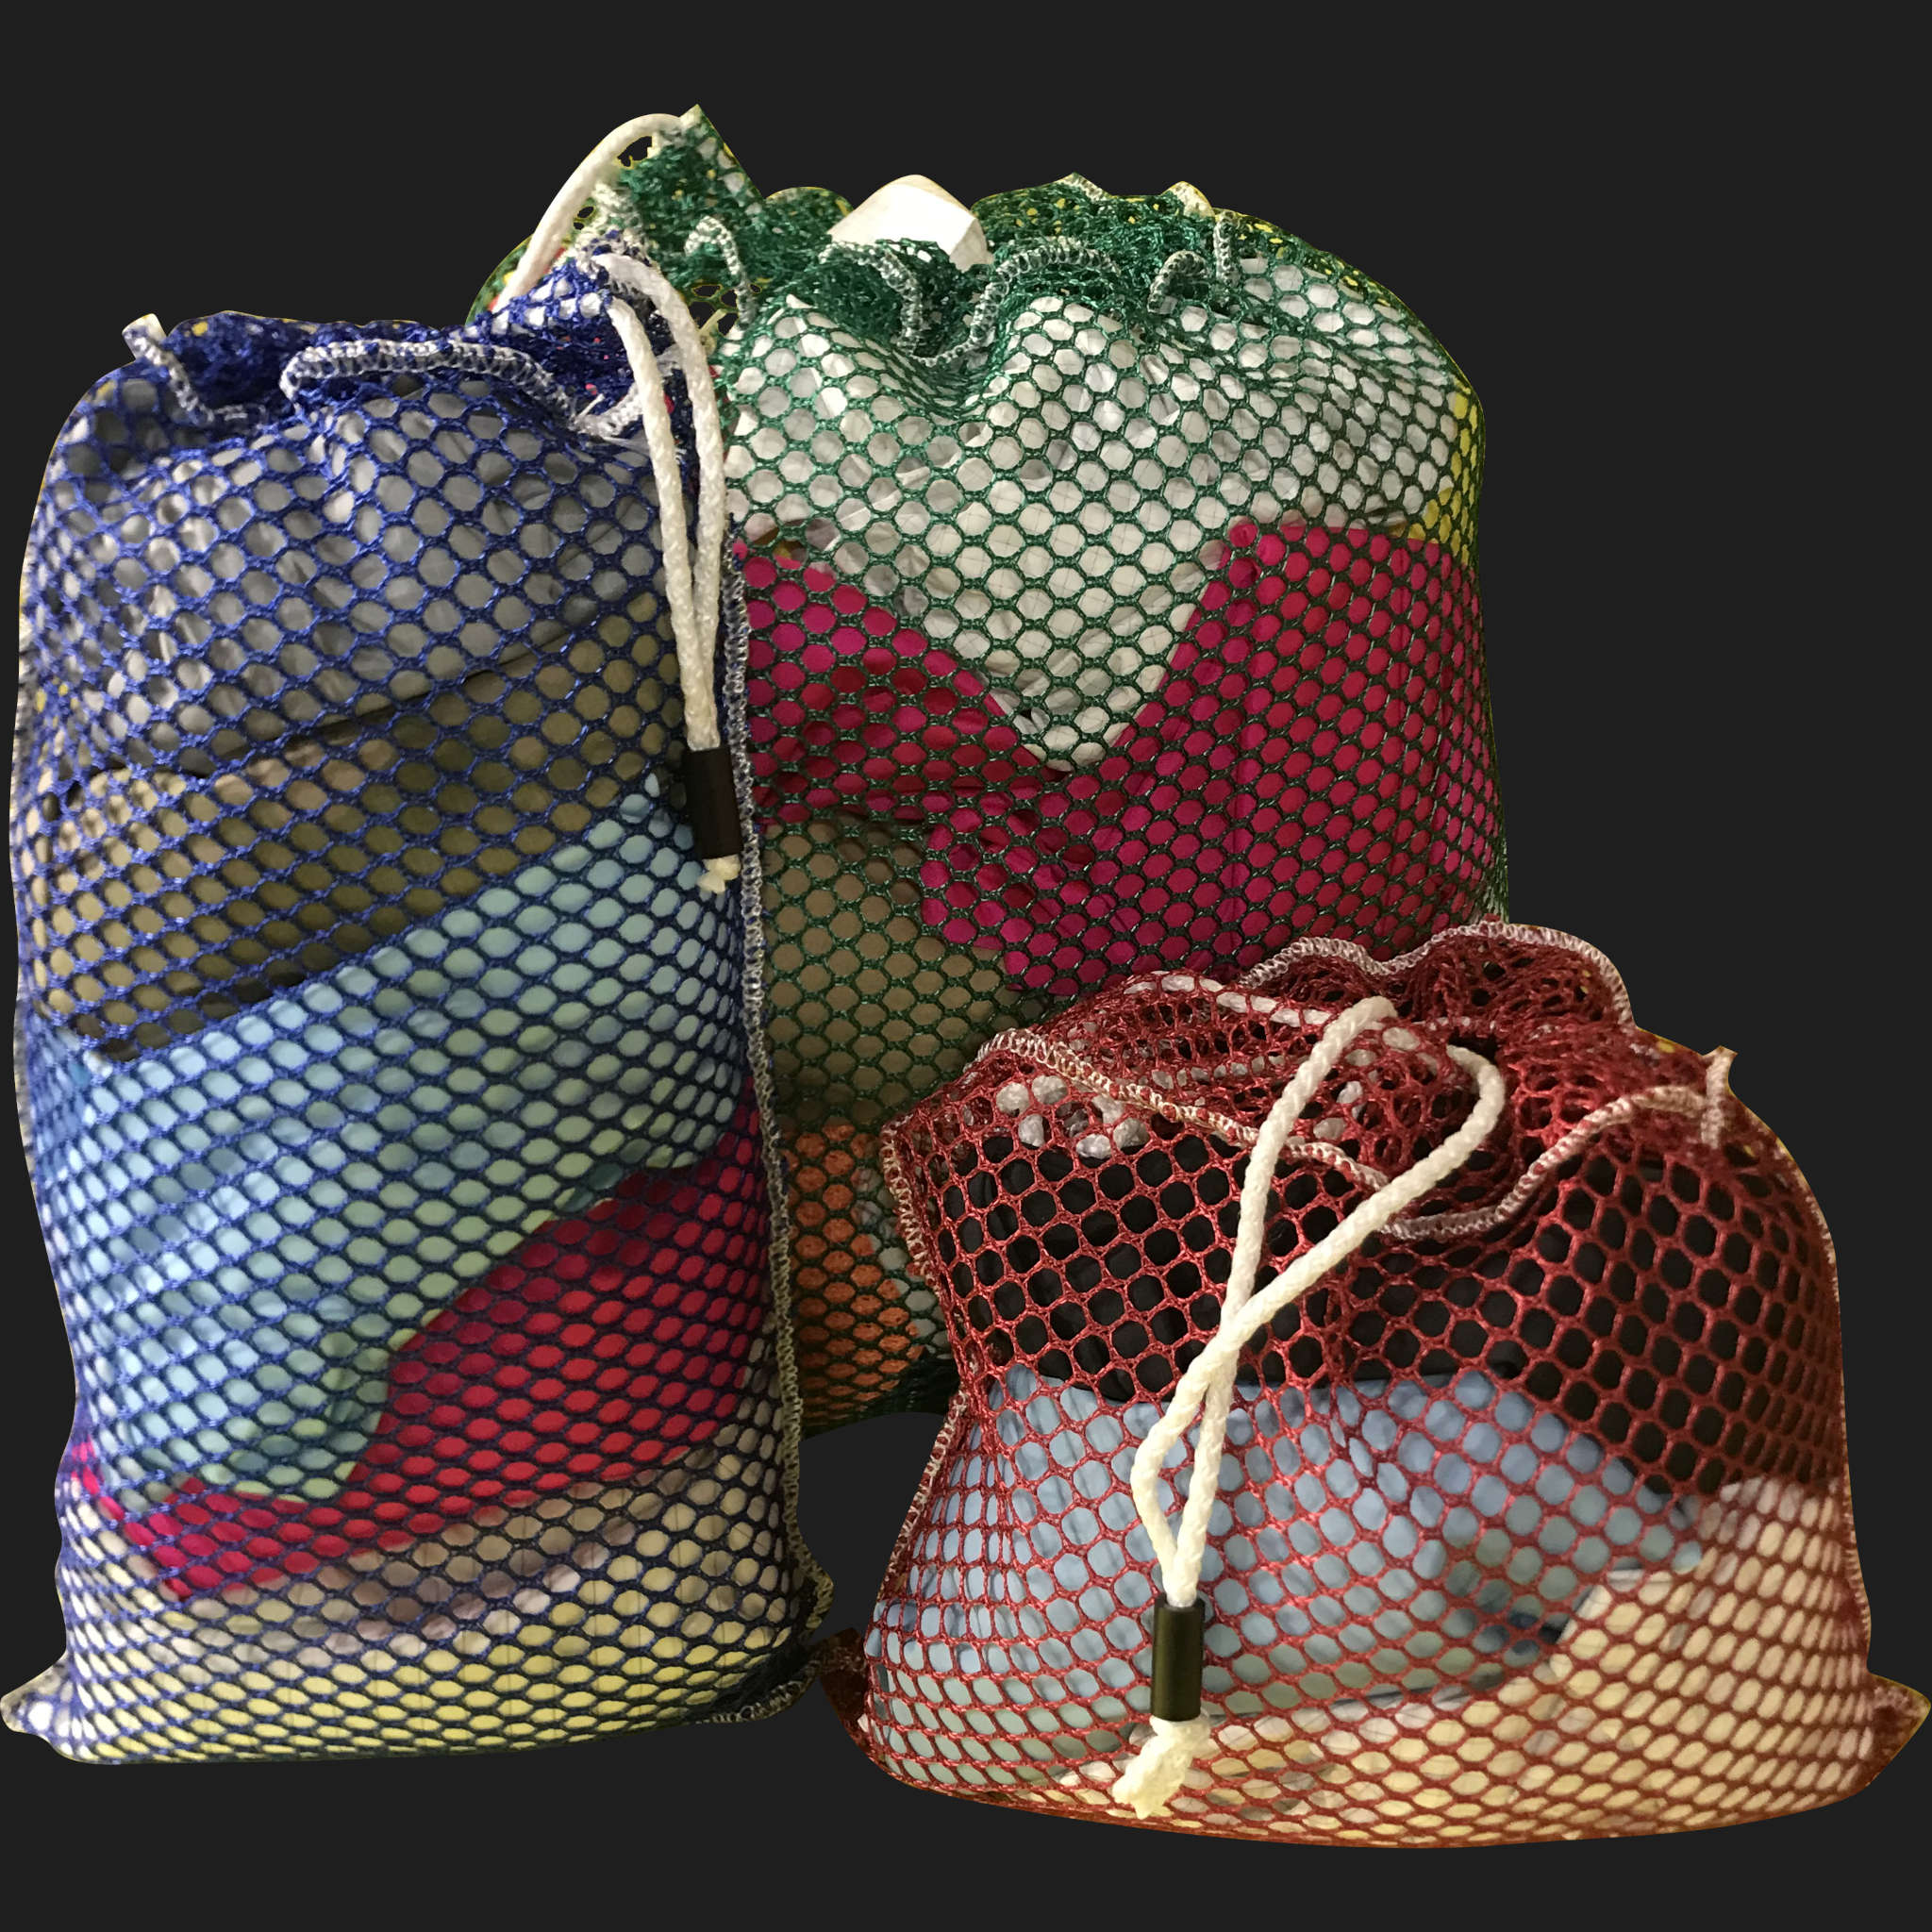 34" x 50" Customized Mesh-Net-Laundry Bags Heavy Duty with Cord and barrellock closure